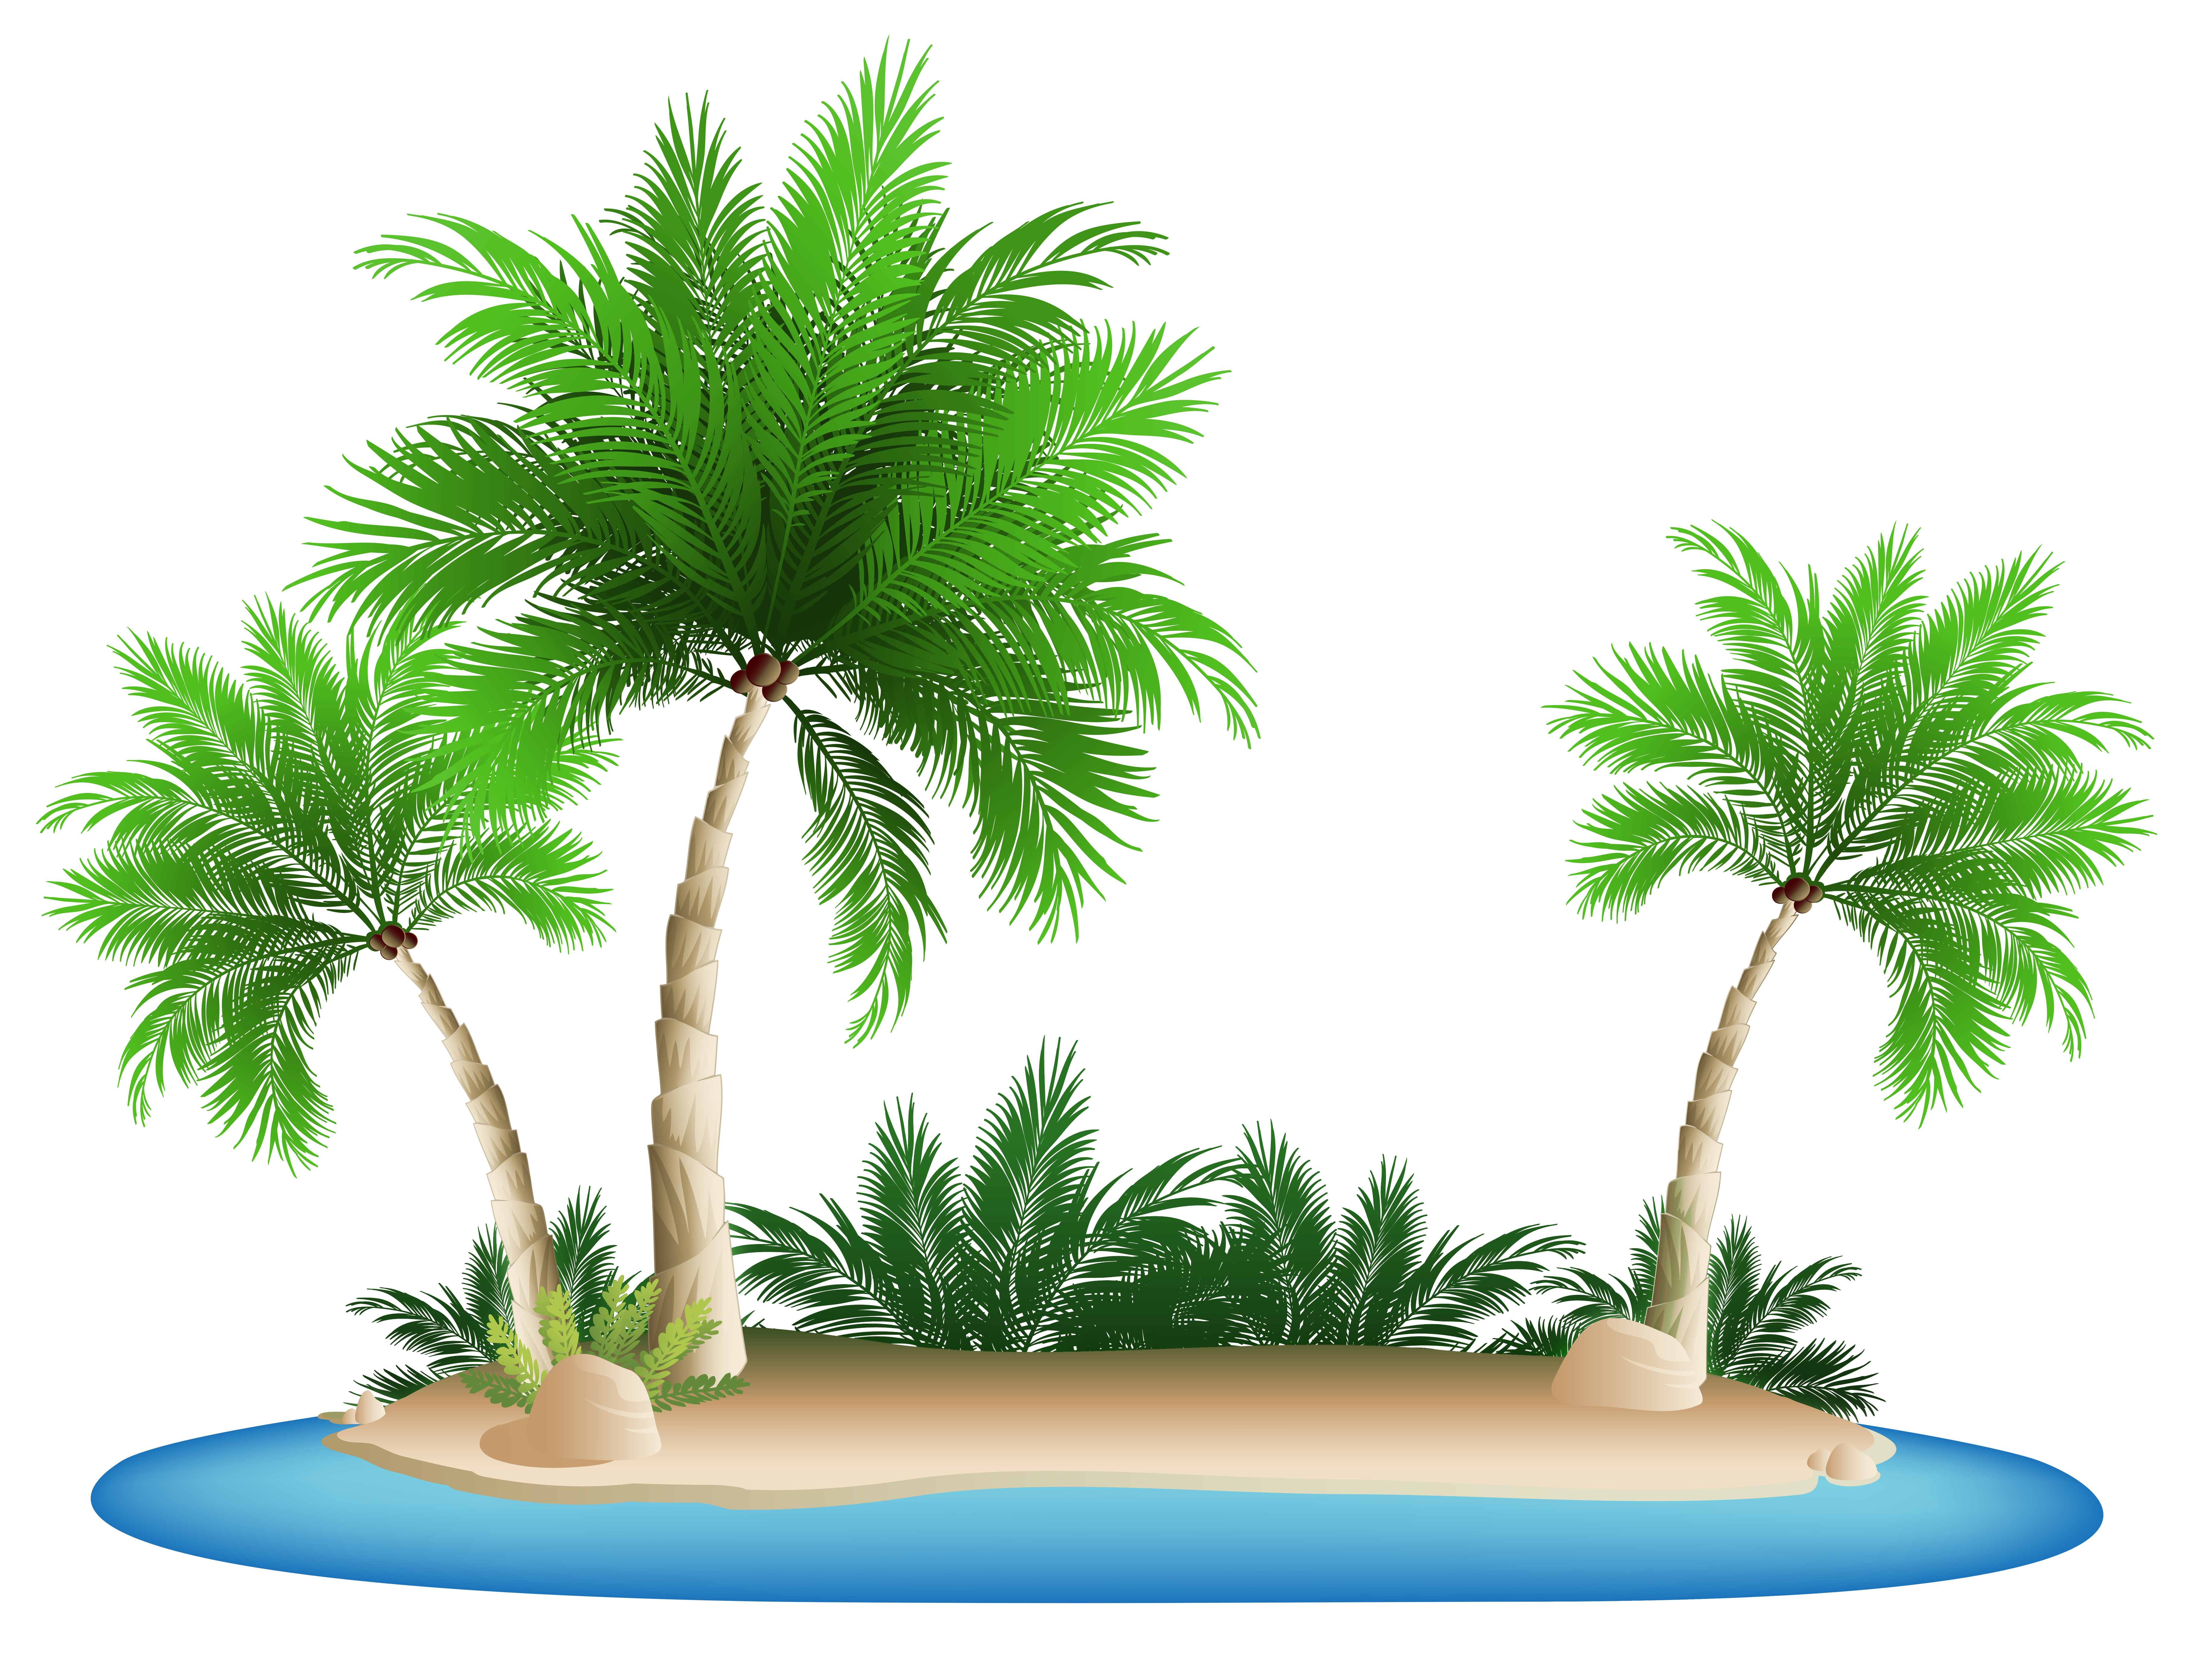 free clipart of islands - photo #37